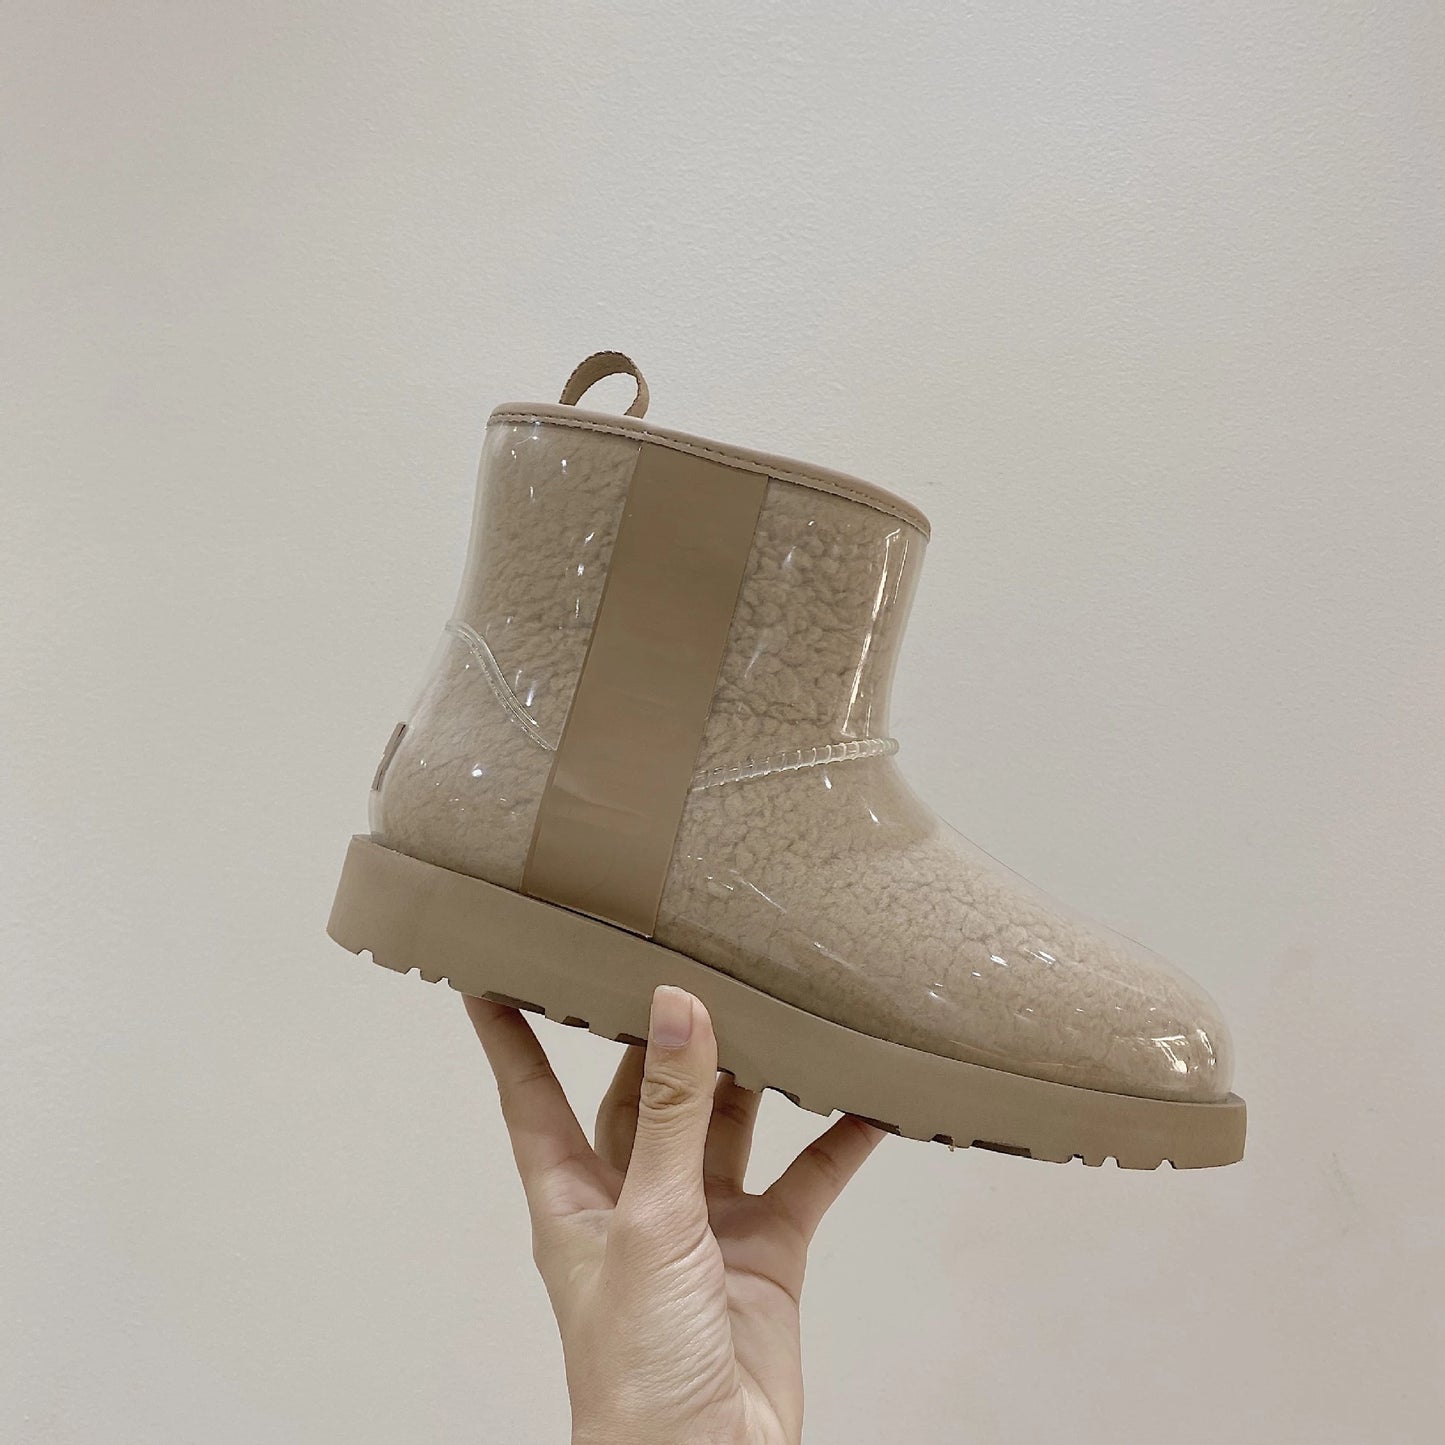 Womens Exclusive Brilliant Style Waterproof Winter Boots